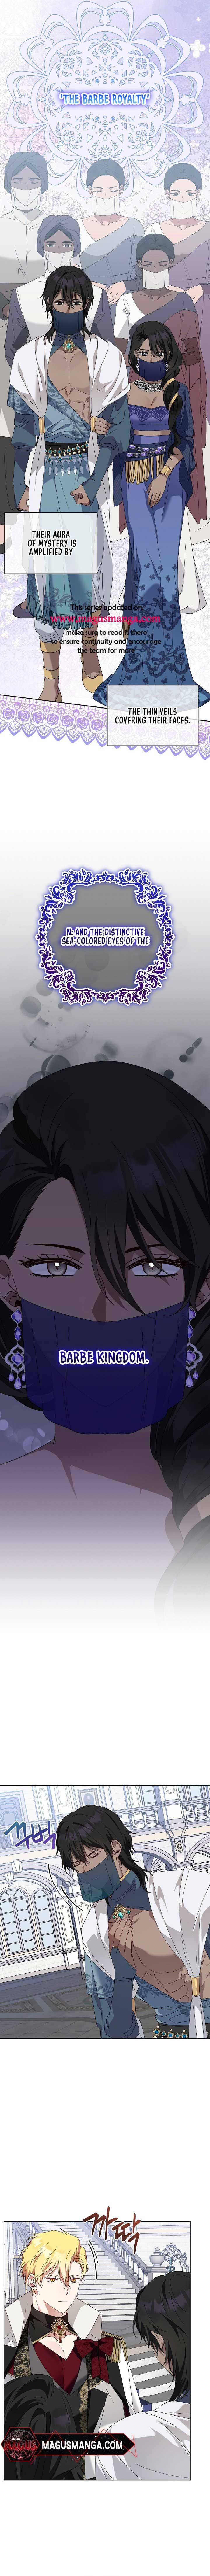 The New Empress chapter 13